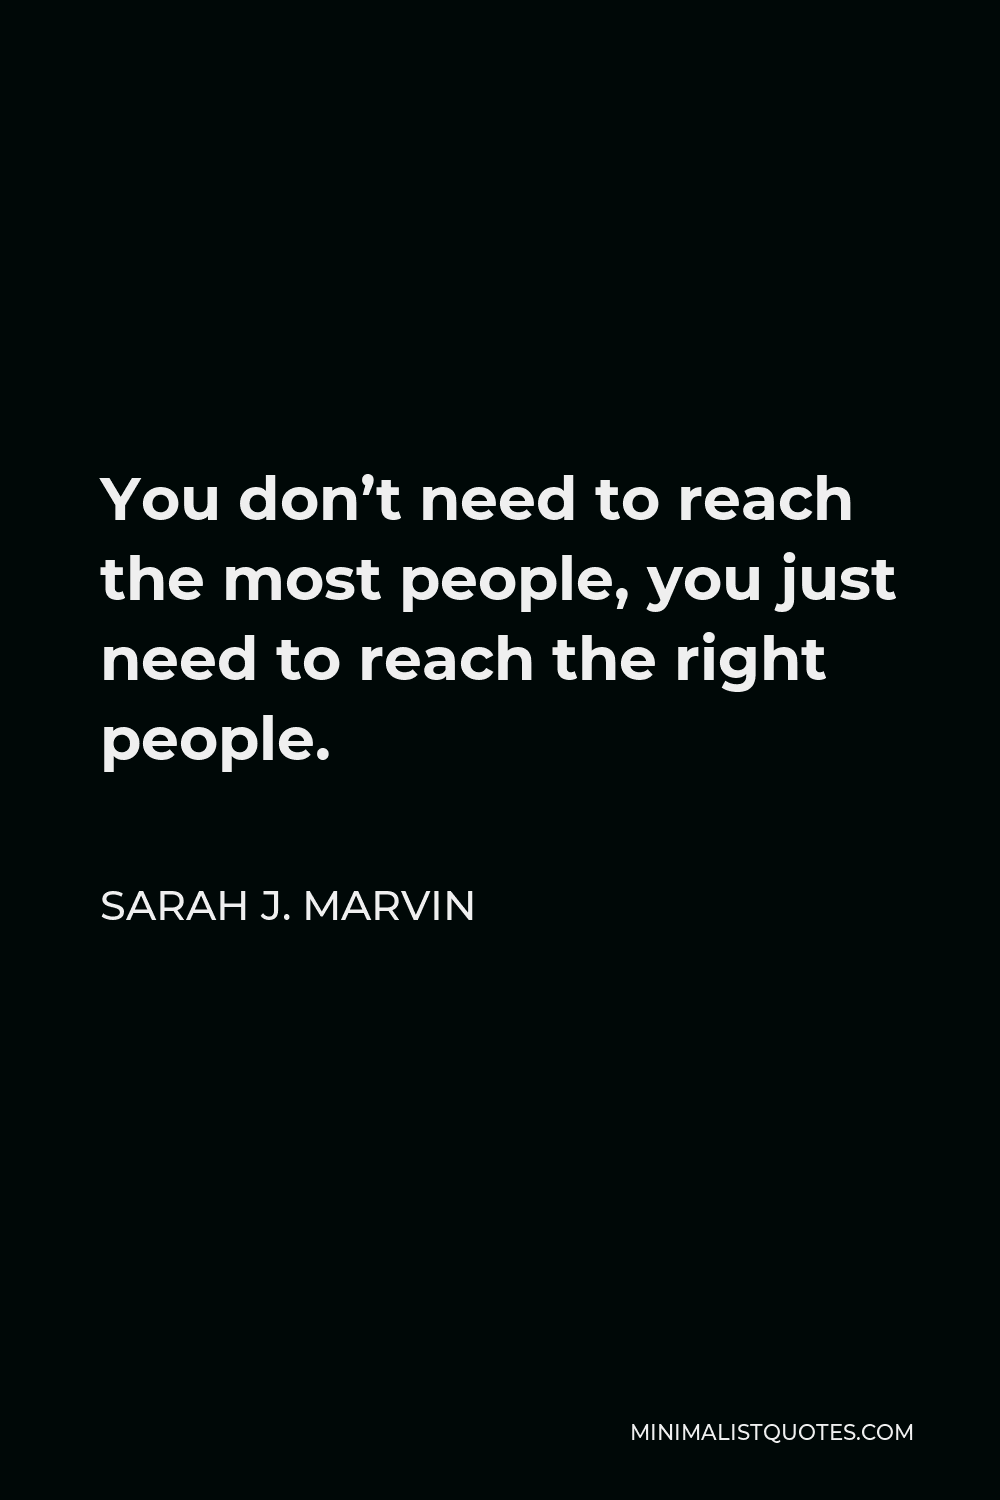 Sarah J. Marvin Quote - You don’t need to reach the most people, you just need to reach the right people.